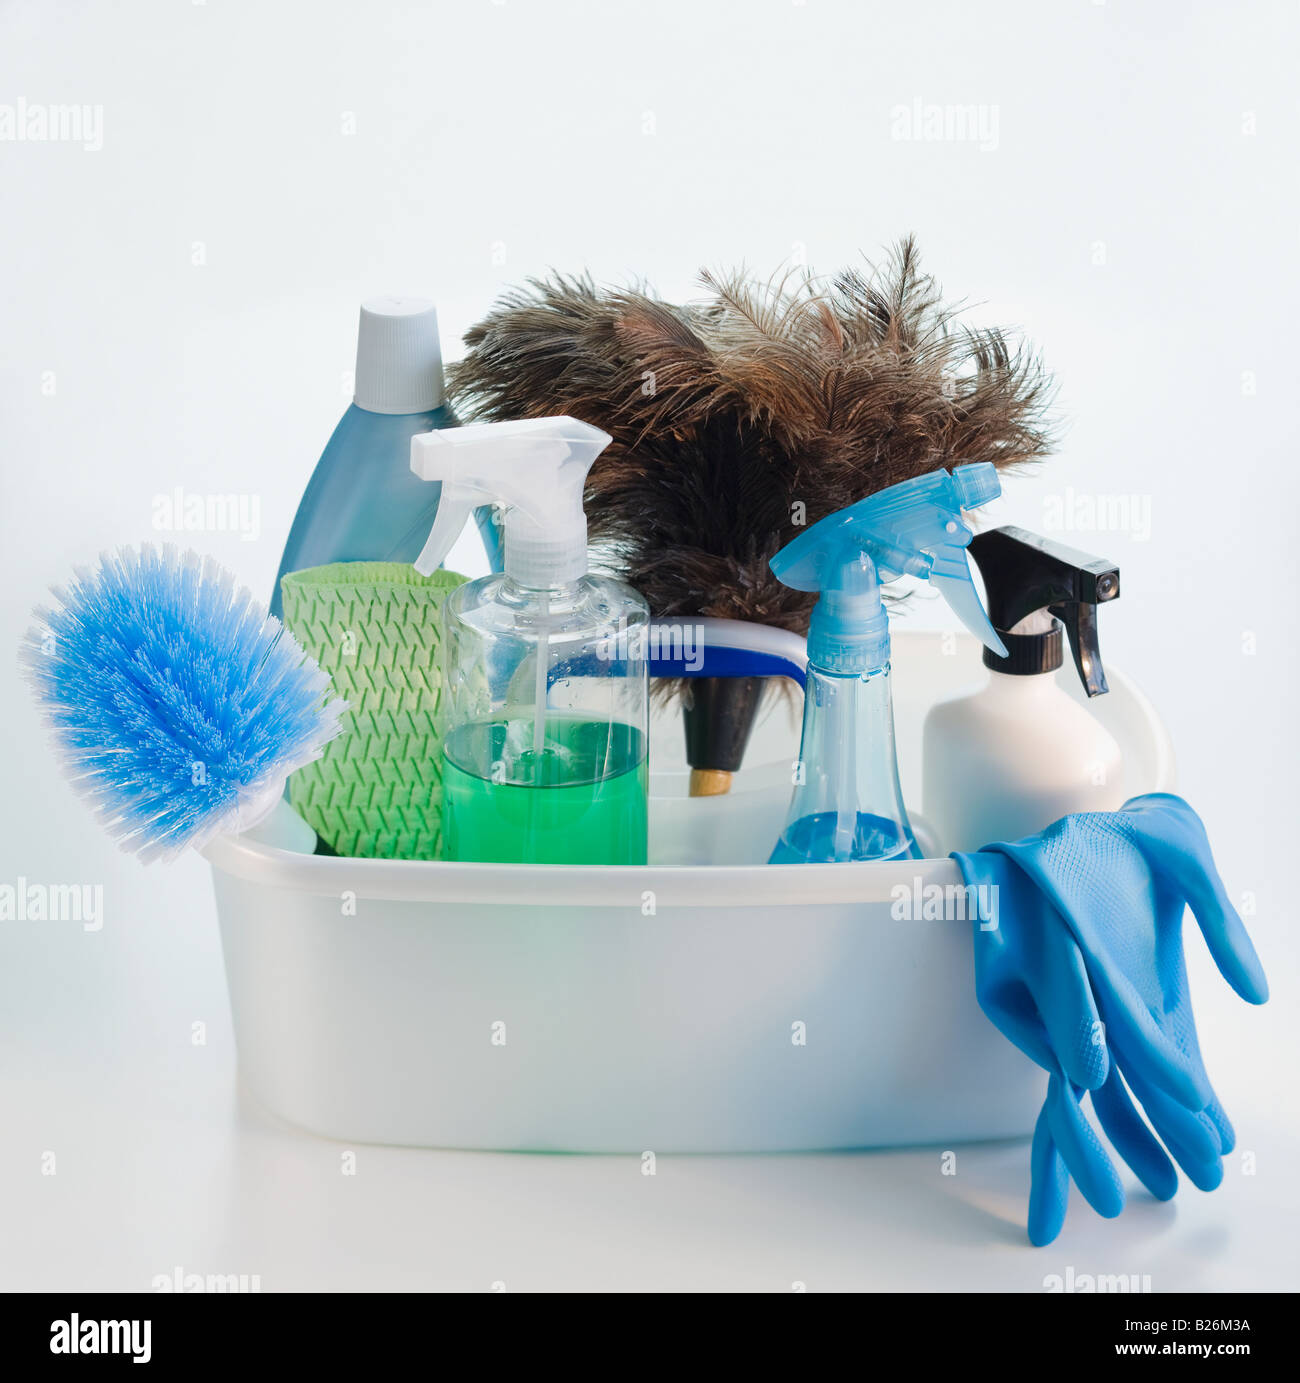 Bin of cleaning products and rubber gloves Stock Photo